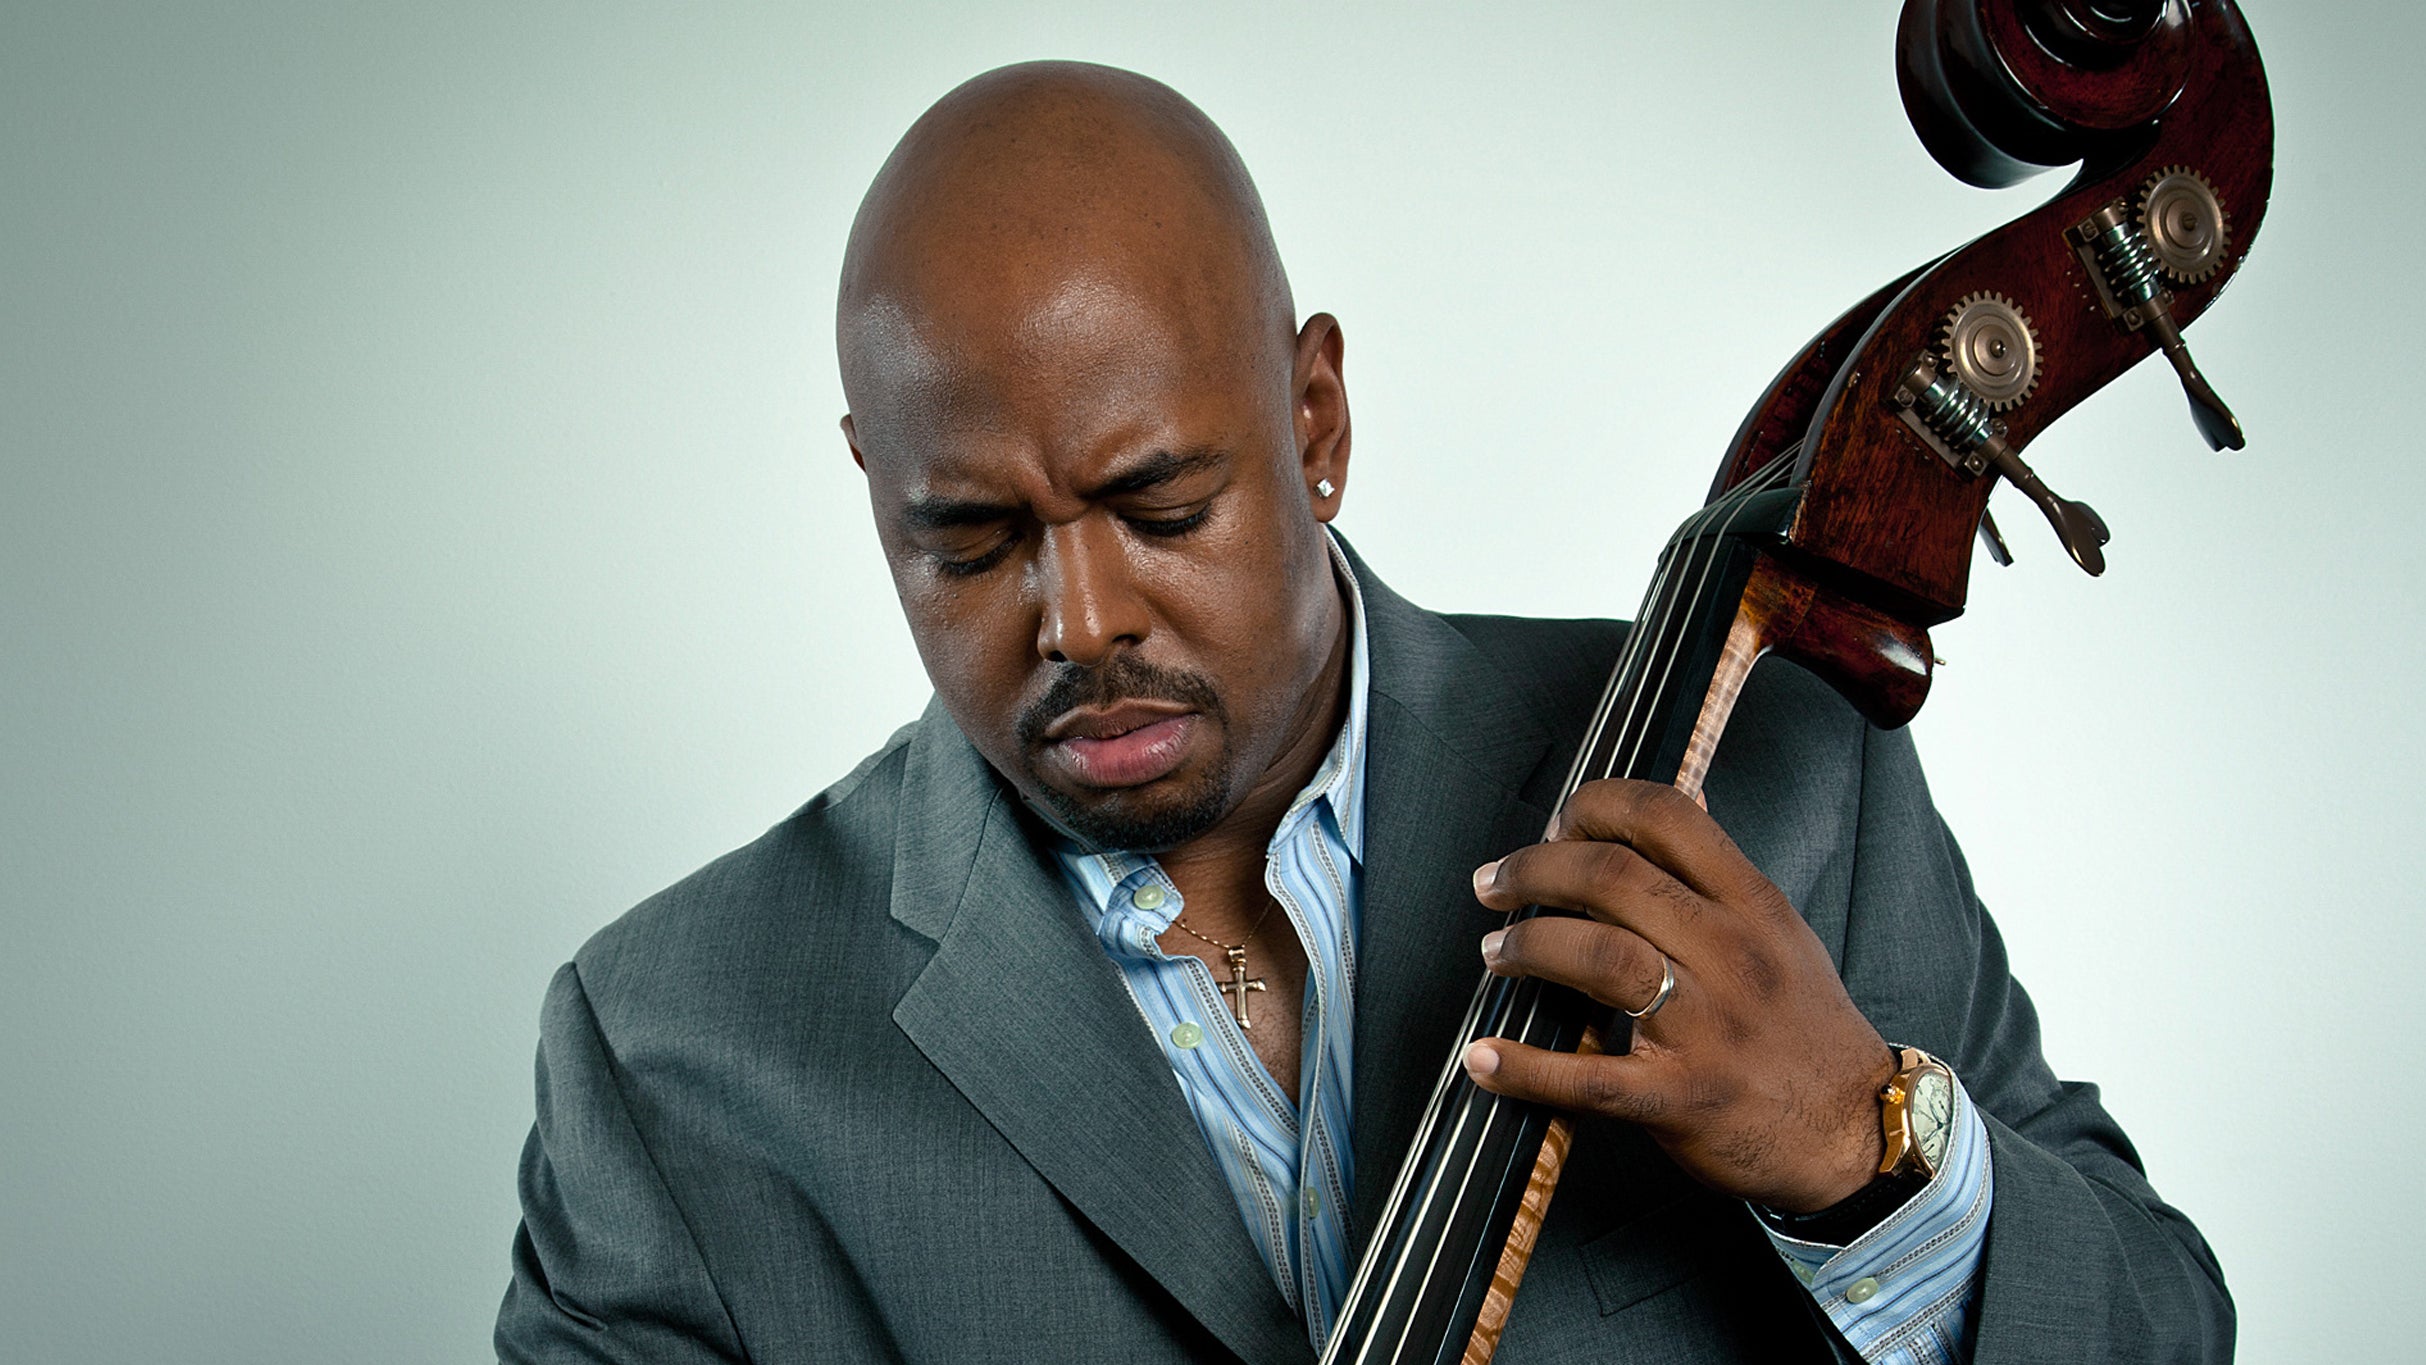 Christian McBride Big Band with special guests